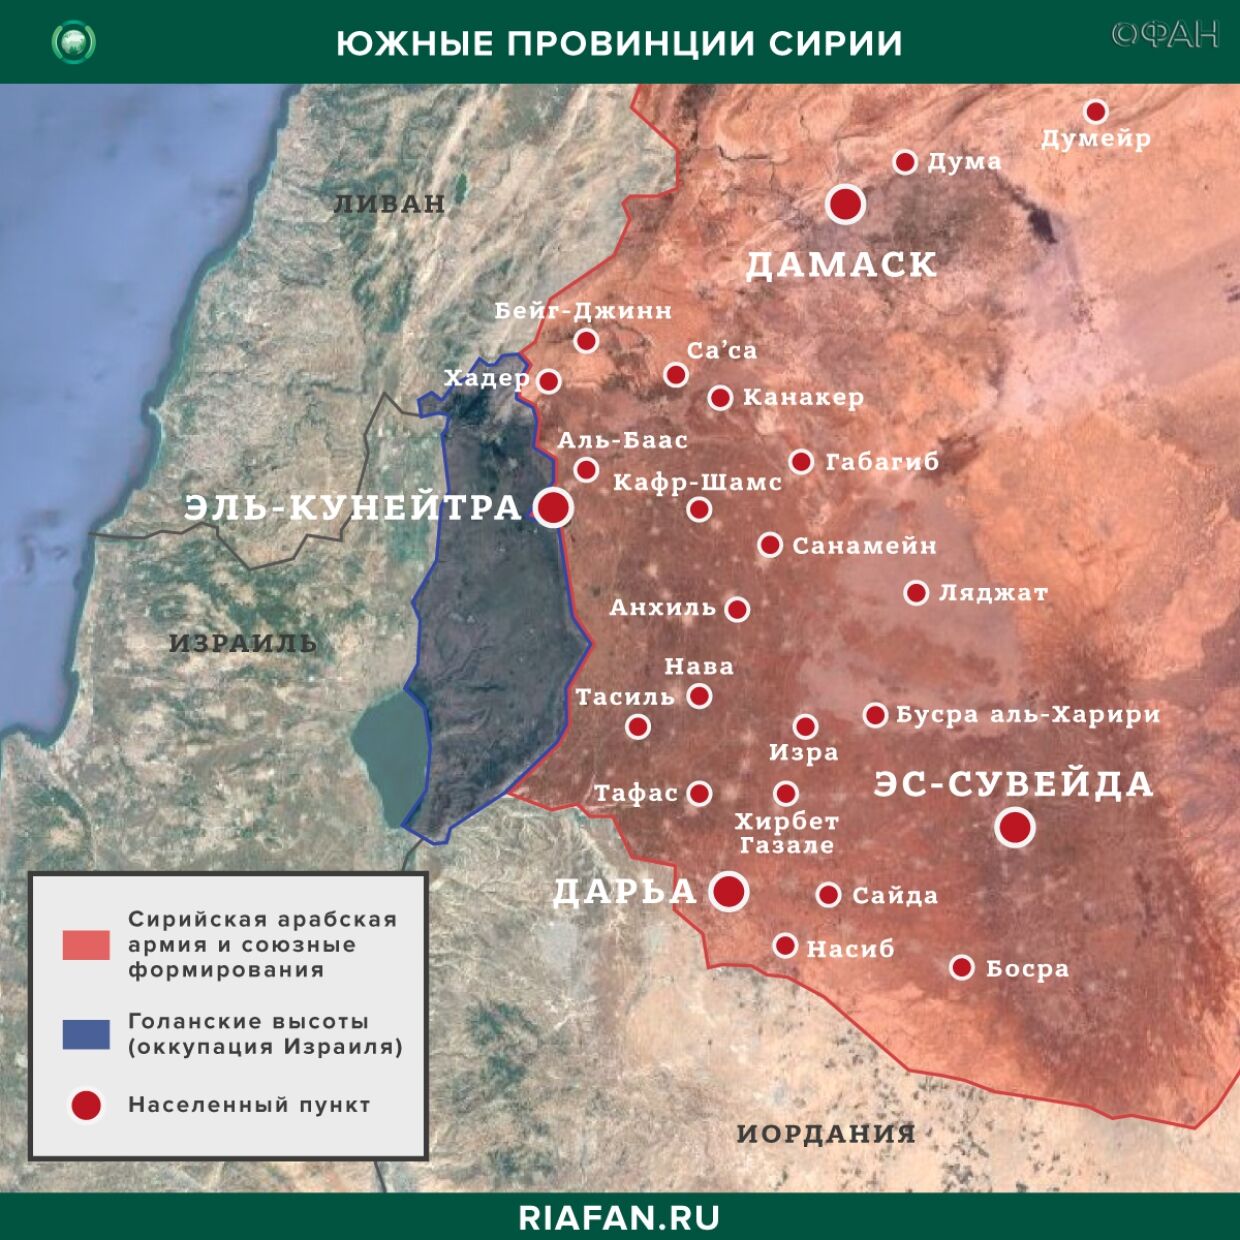 Syria the results of the day on 21 May 06.00: residents suffered during skirmishes of allies of Turkey in Afrin, SAA deployed US convoy in Hasak